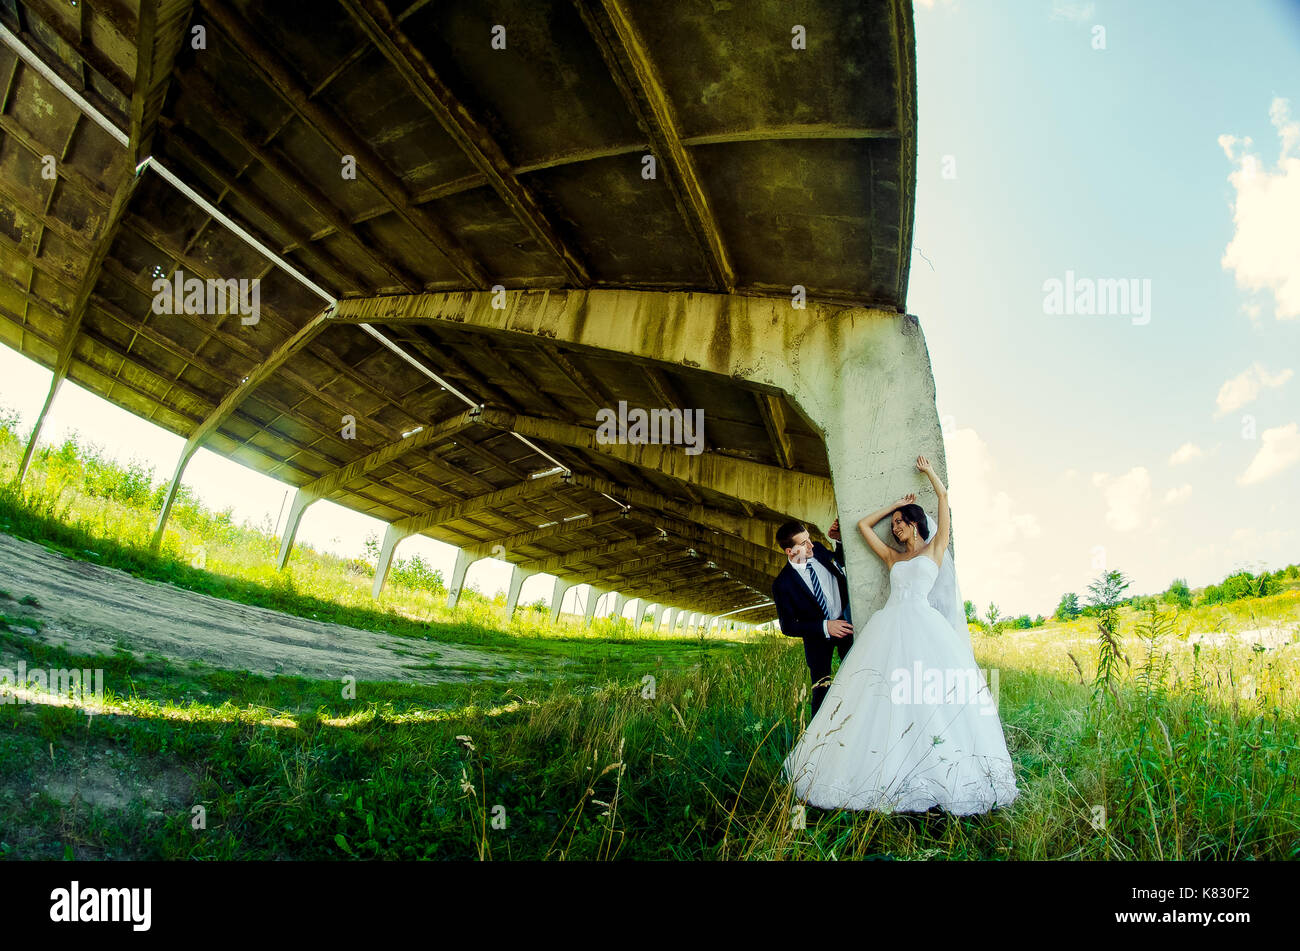 Ukraine, Lutsk - 09.08.2014: the Wedding ceremony. Lovers of nature walks in Park. Beautiful delicate and romantic couples, loving each other. Editori Stock Photo